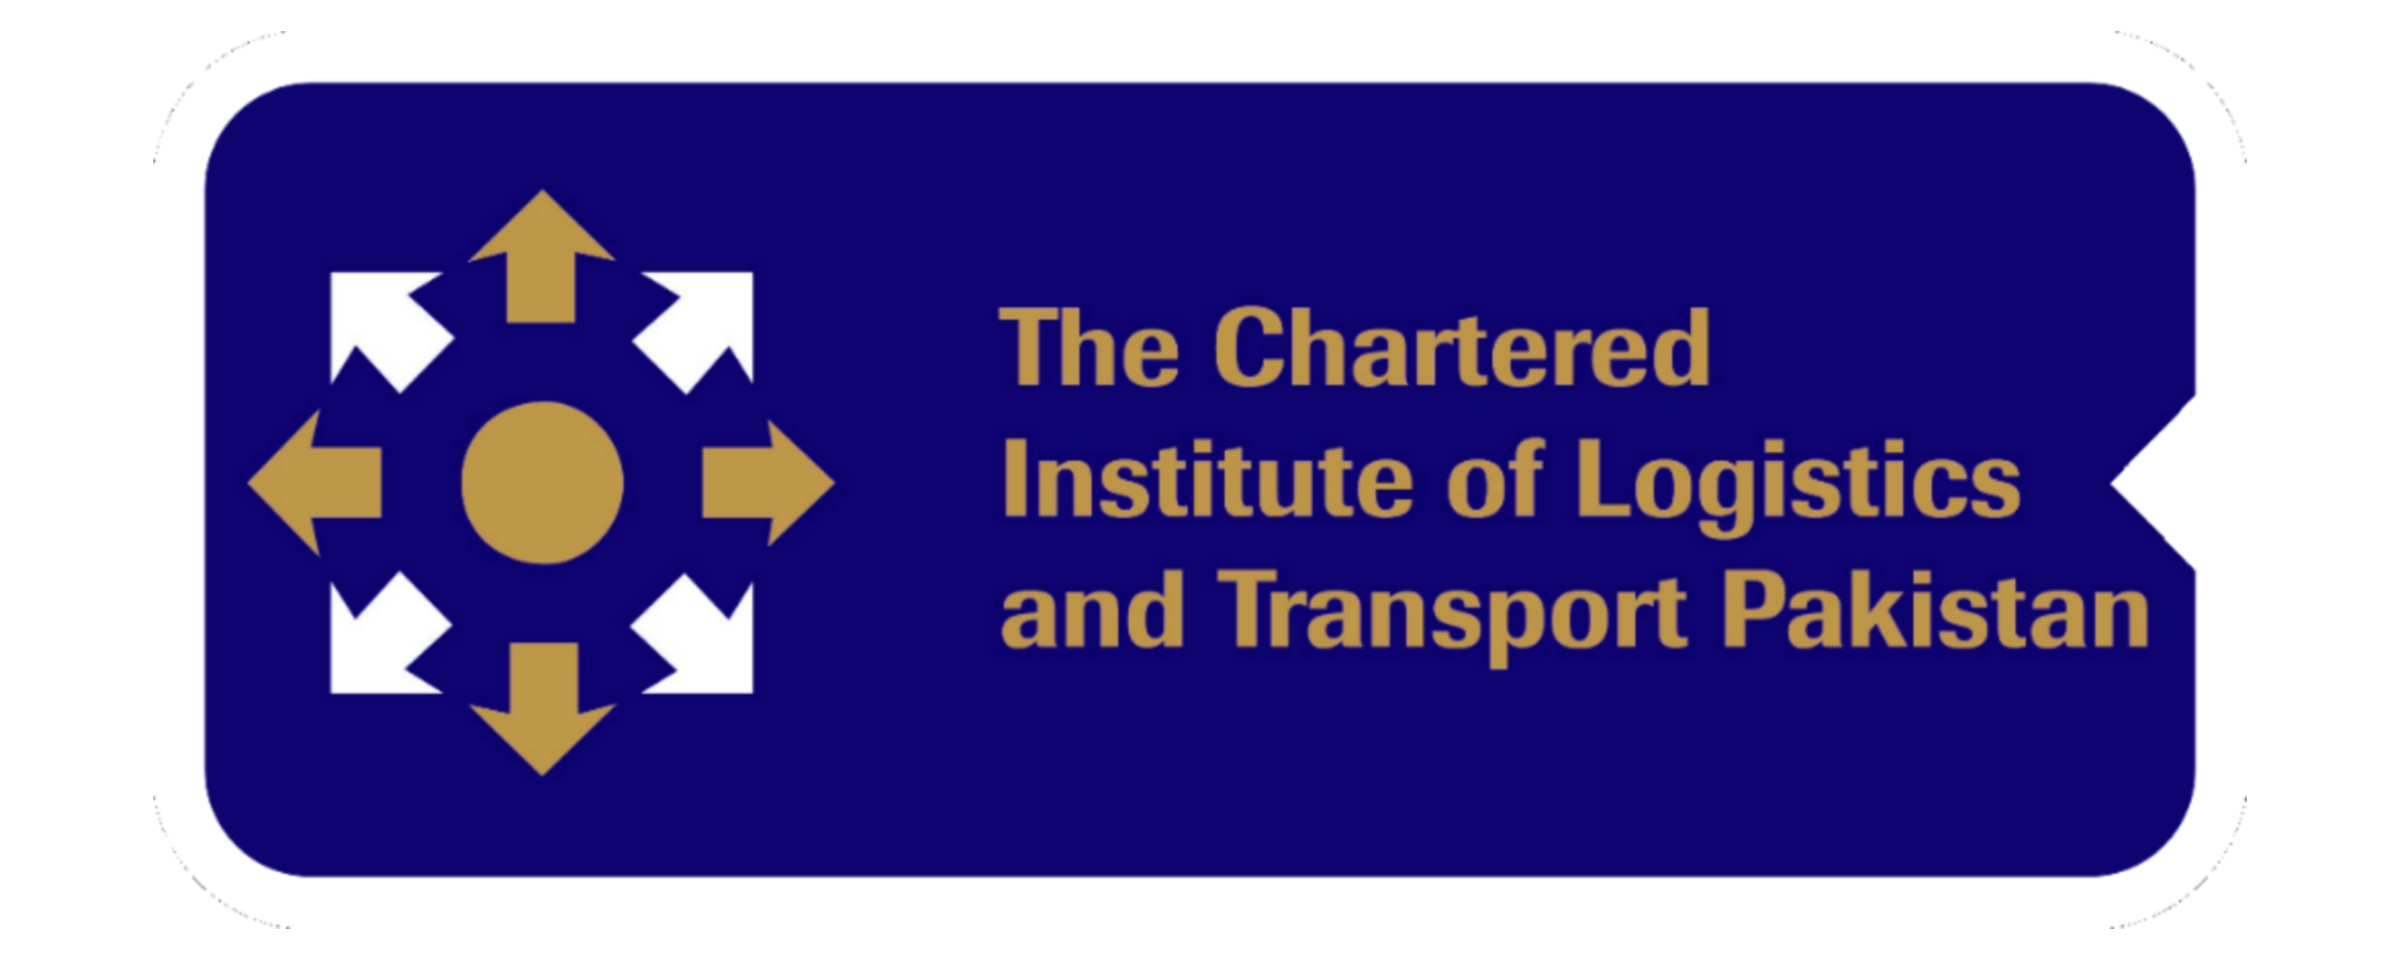 the chartered institute of logistics and transport pakistan MTI Maritime Training Institute affiliation logo karachi pakistan merchant navy courses how to join